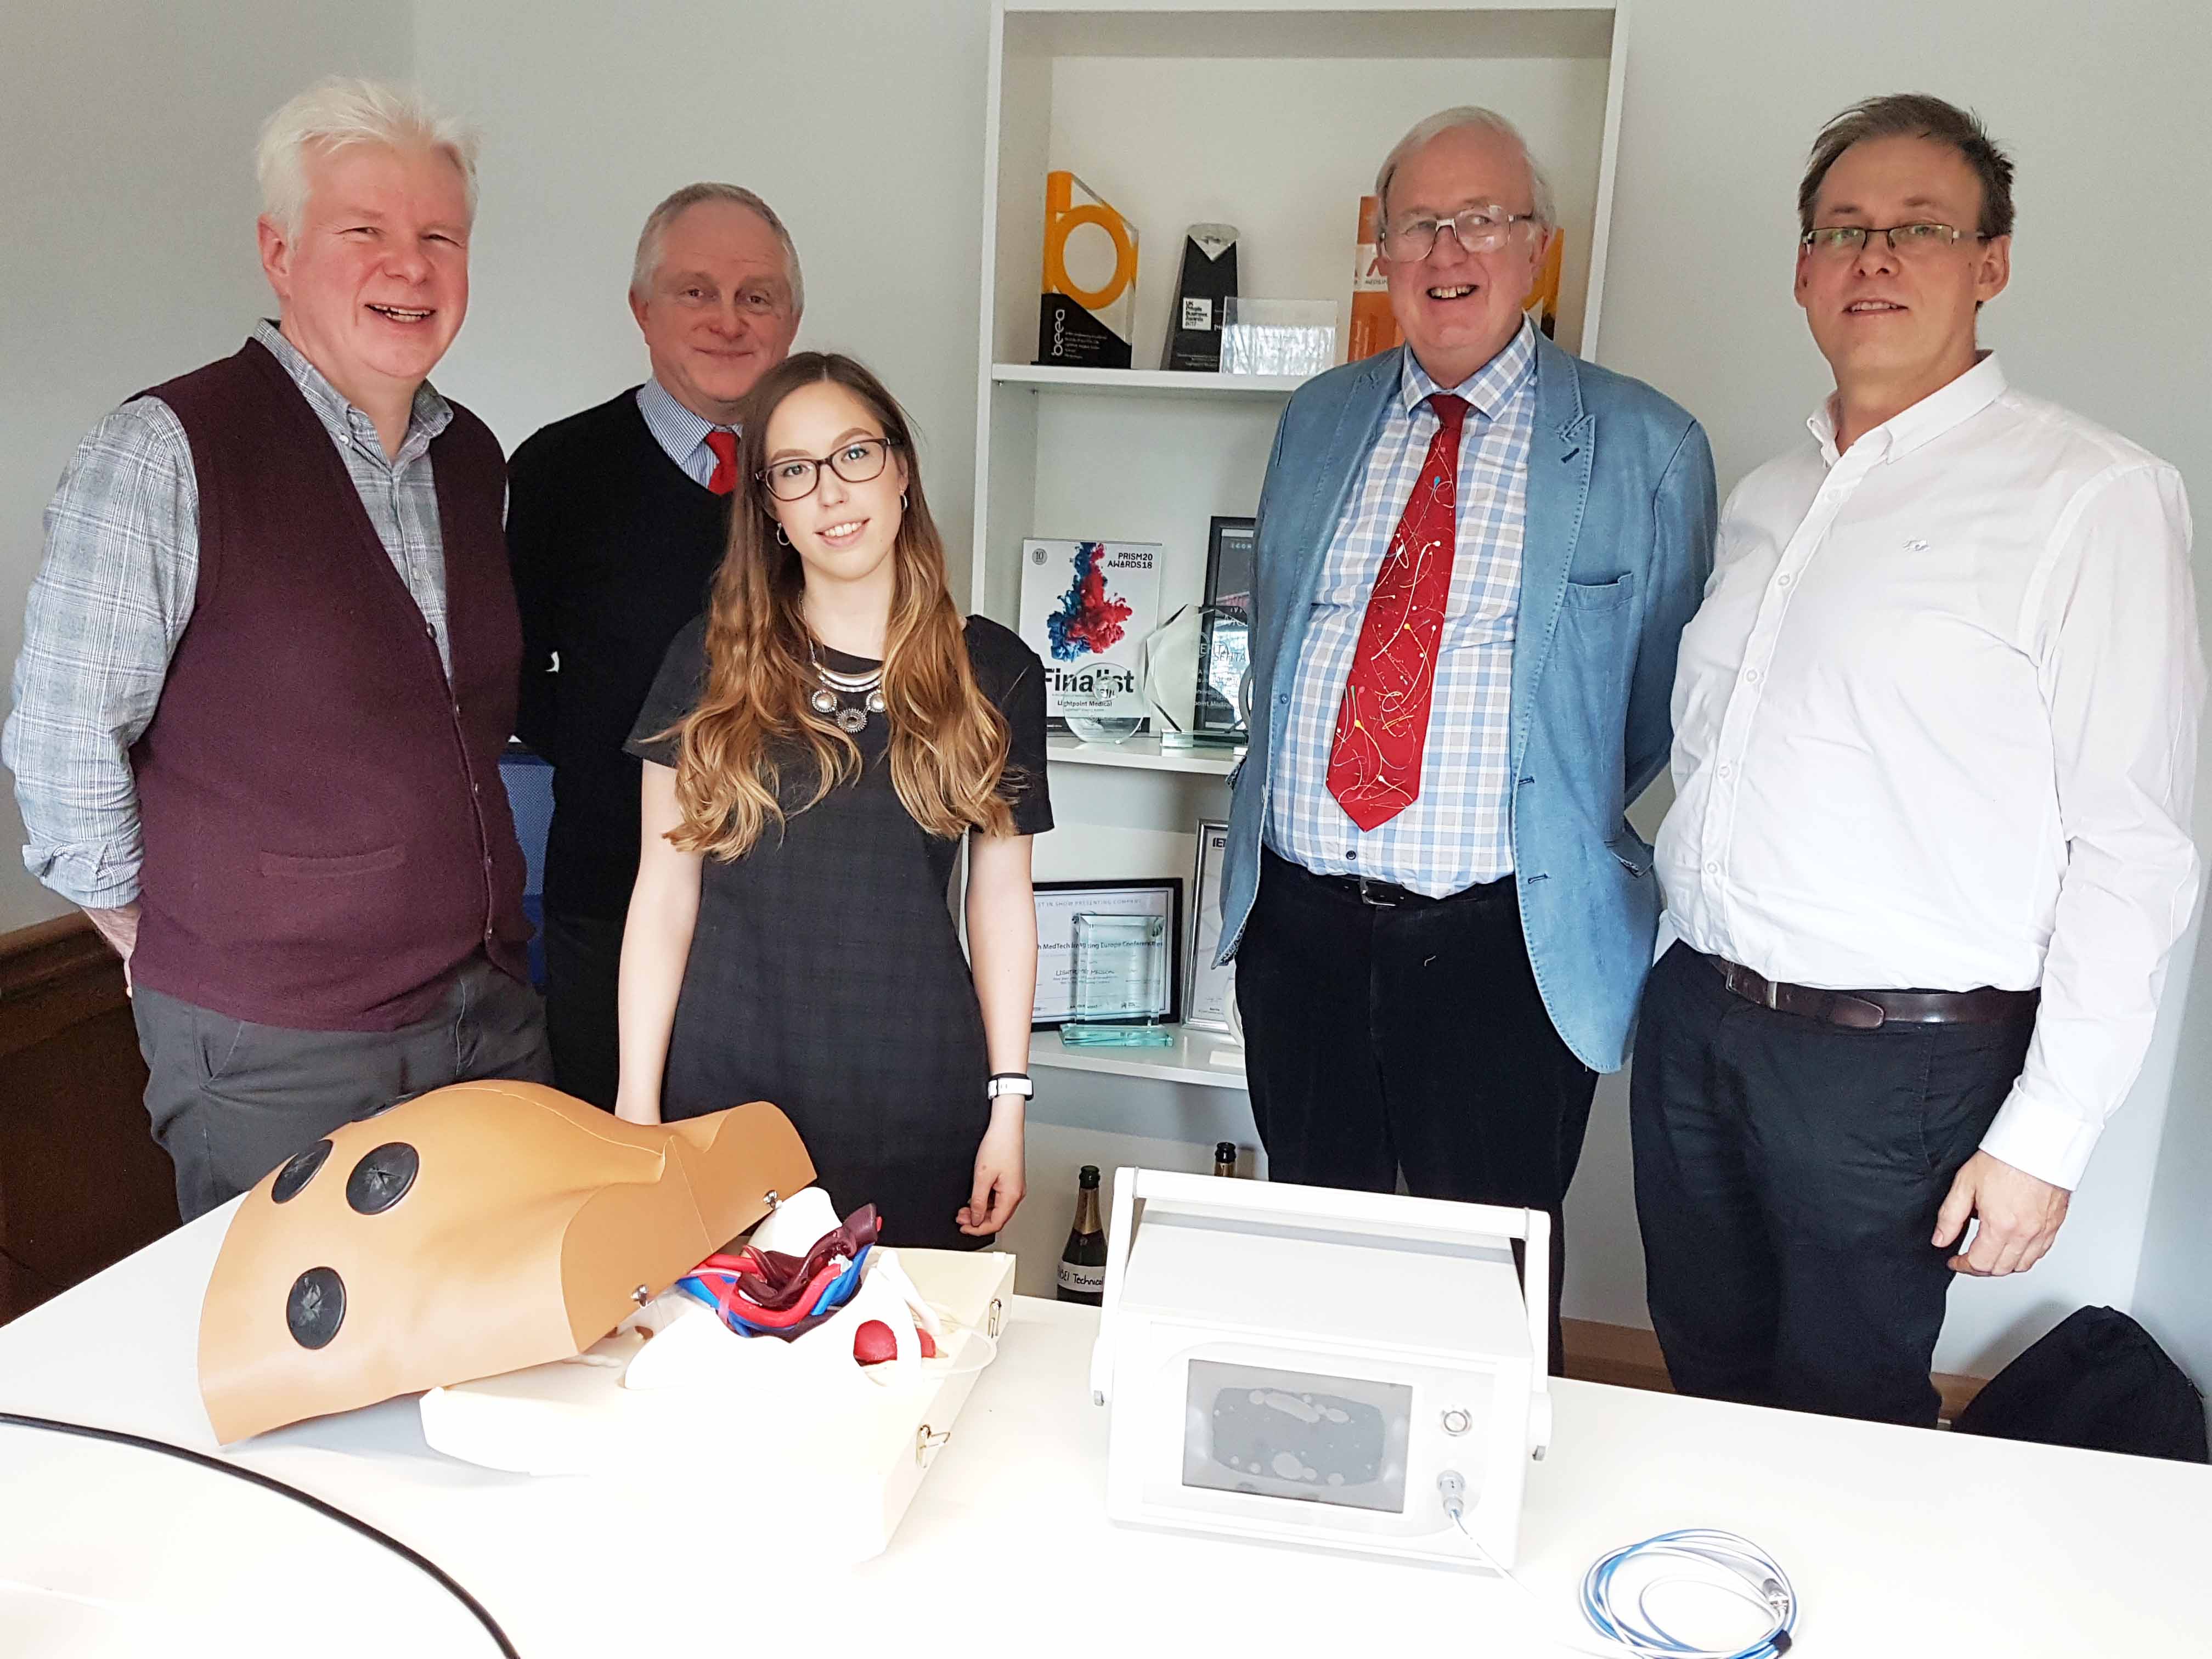 Pictured from left, Steve McGonigal, Stewart Forbes from Lightpoint, and UON’s Francesca Oldfield, Tony Denman, Friedmann Schaber.